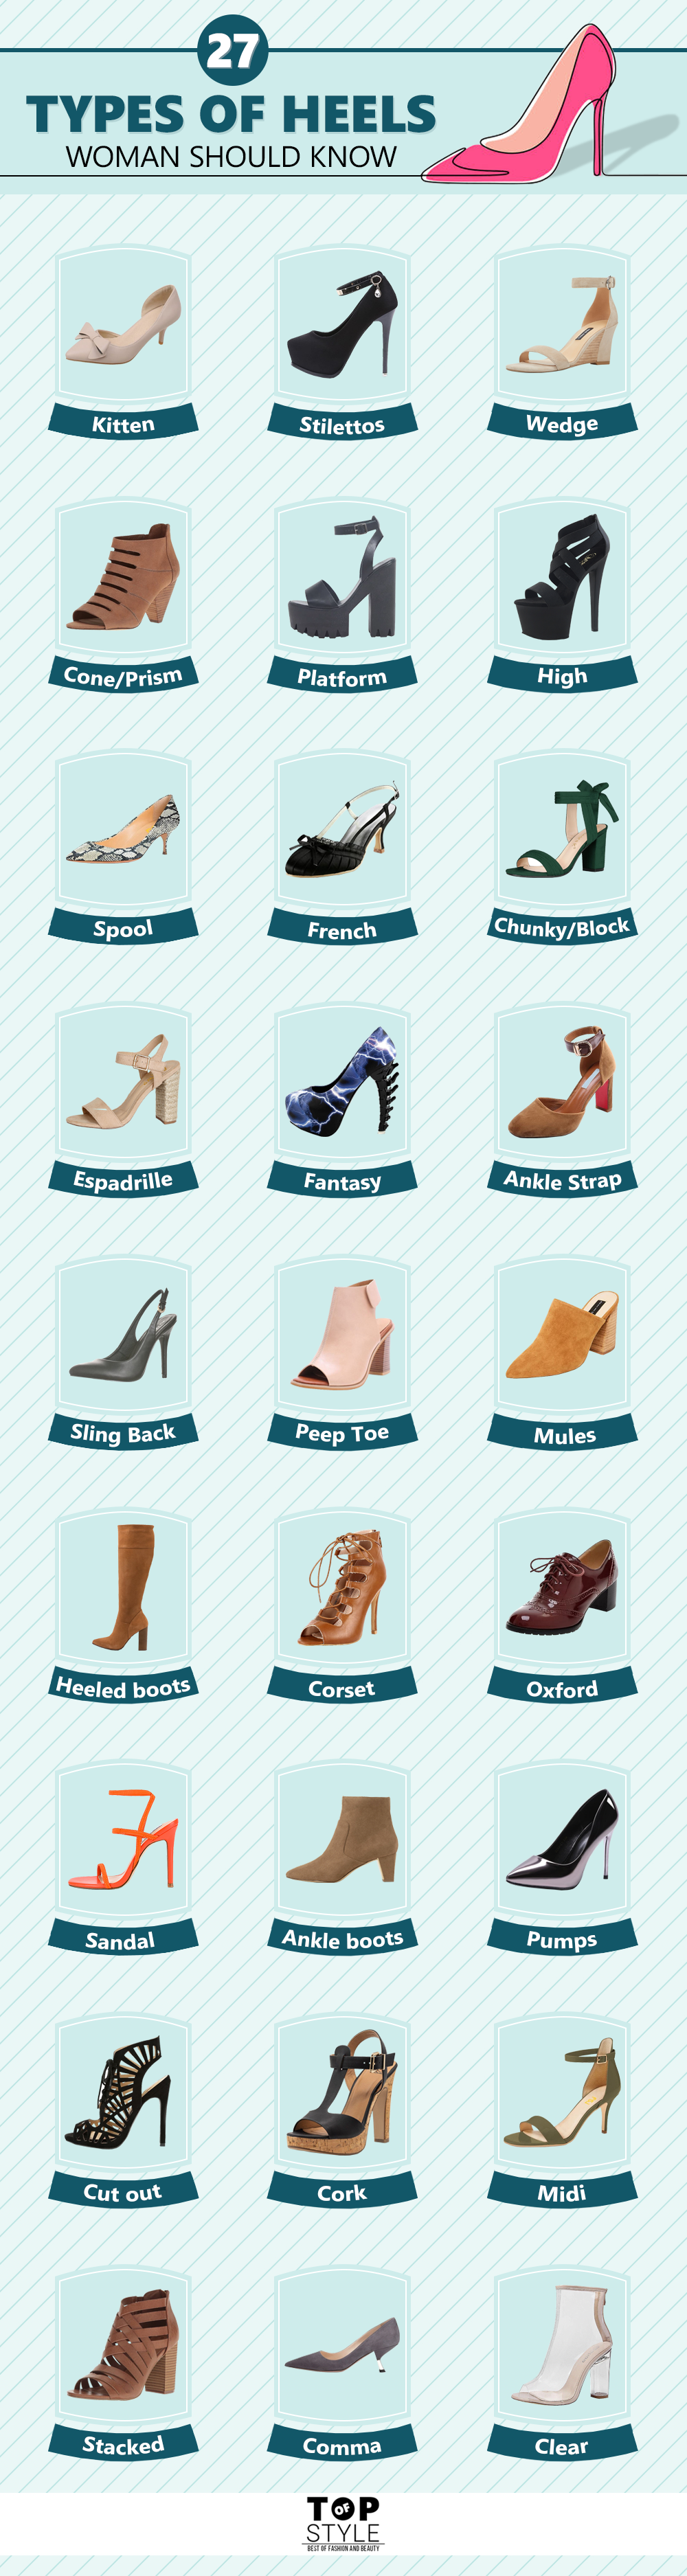 27 Different Types of Heels Every Woman Should Know TopOfStyle Blog